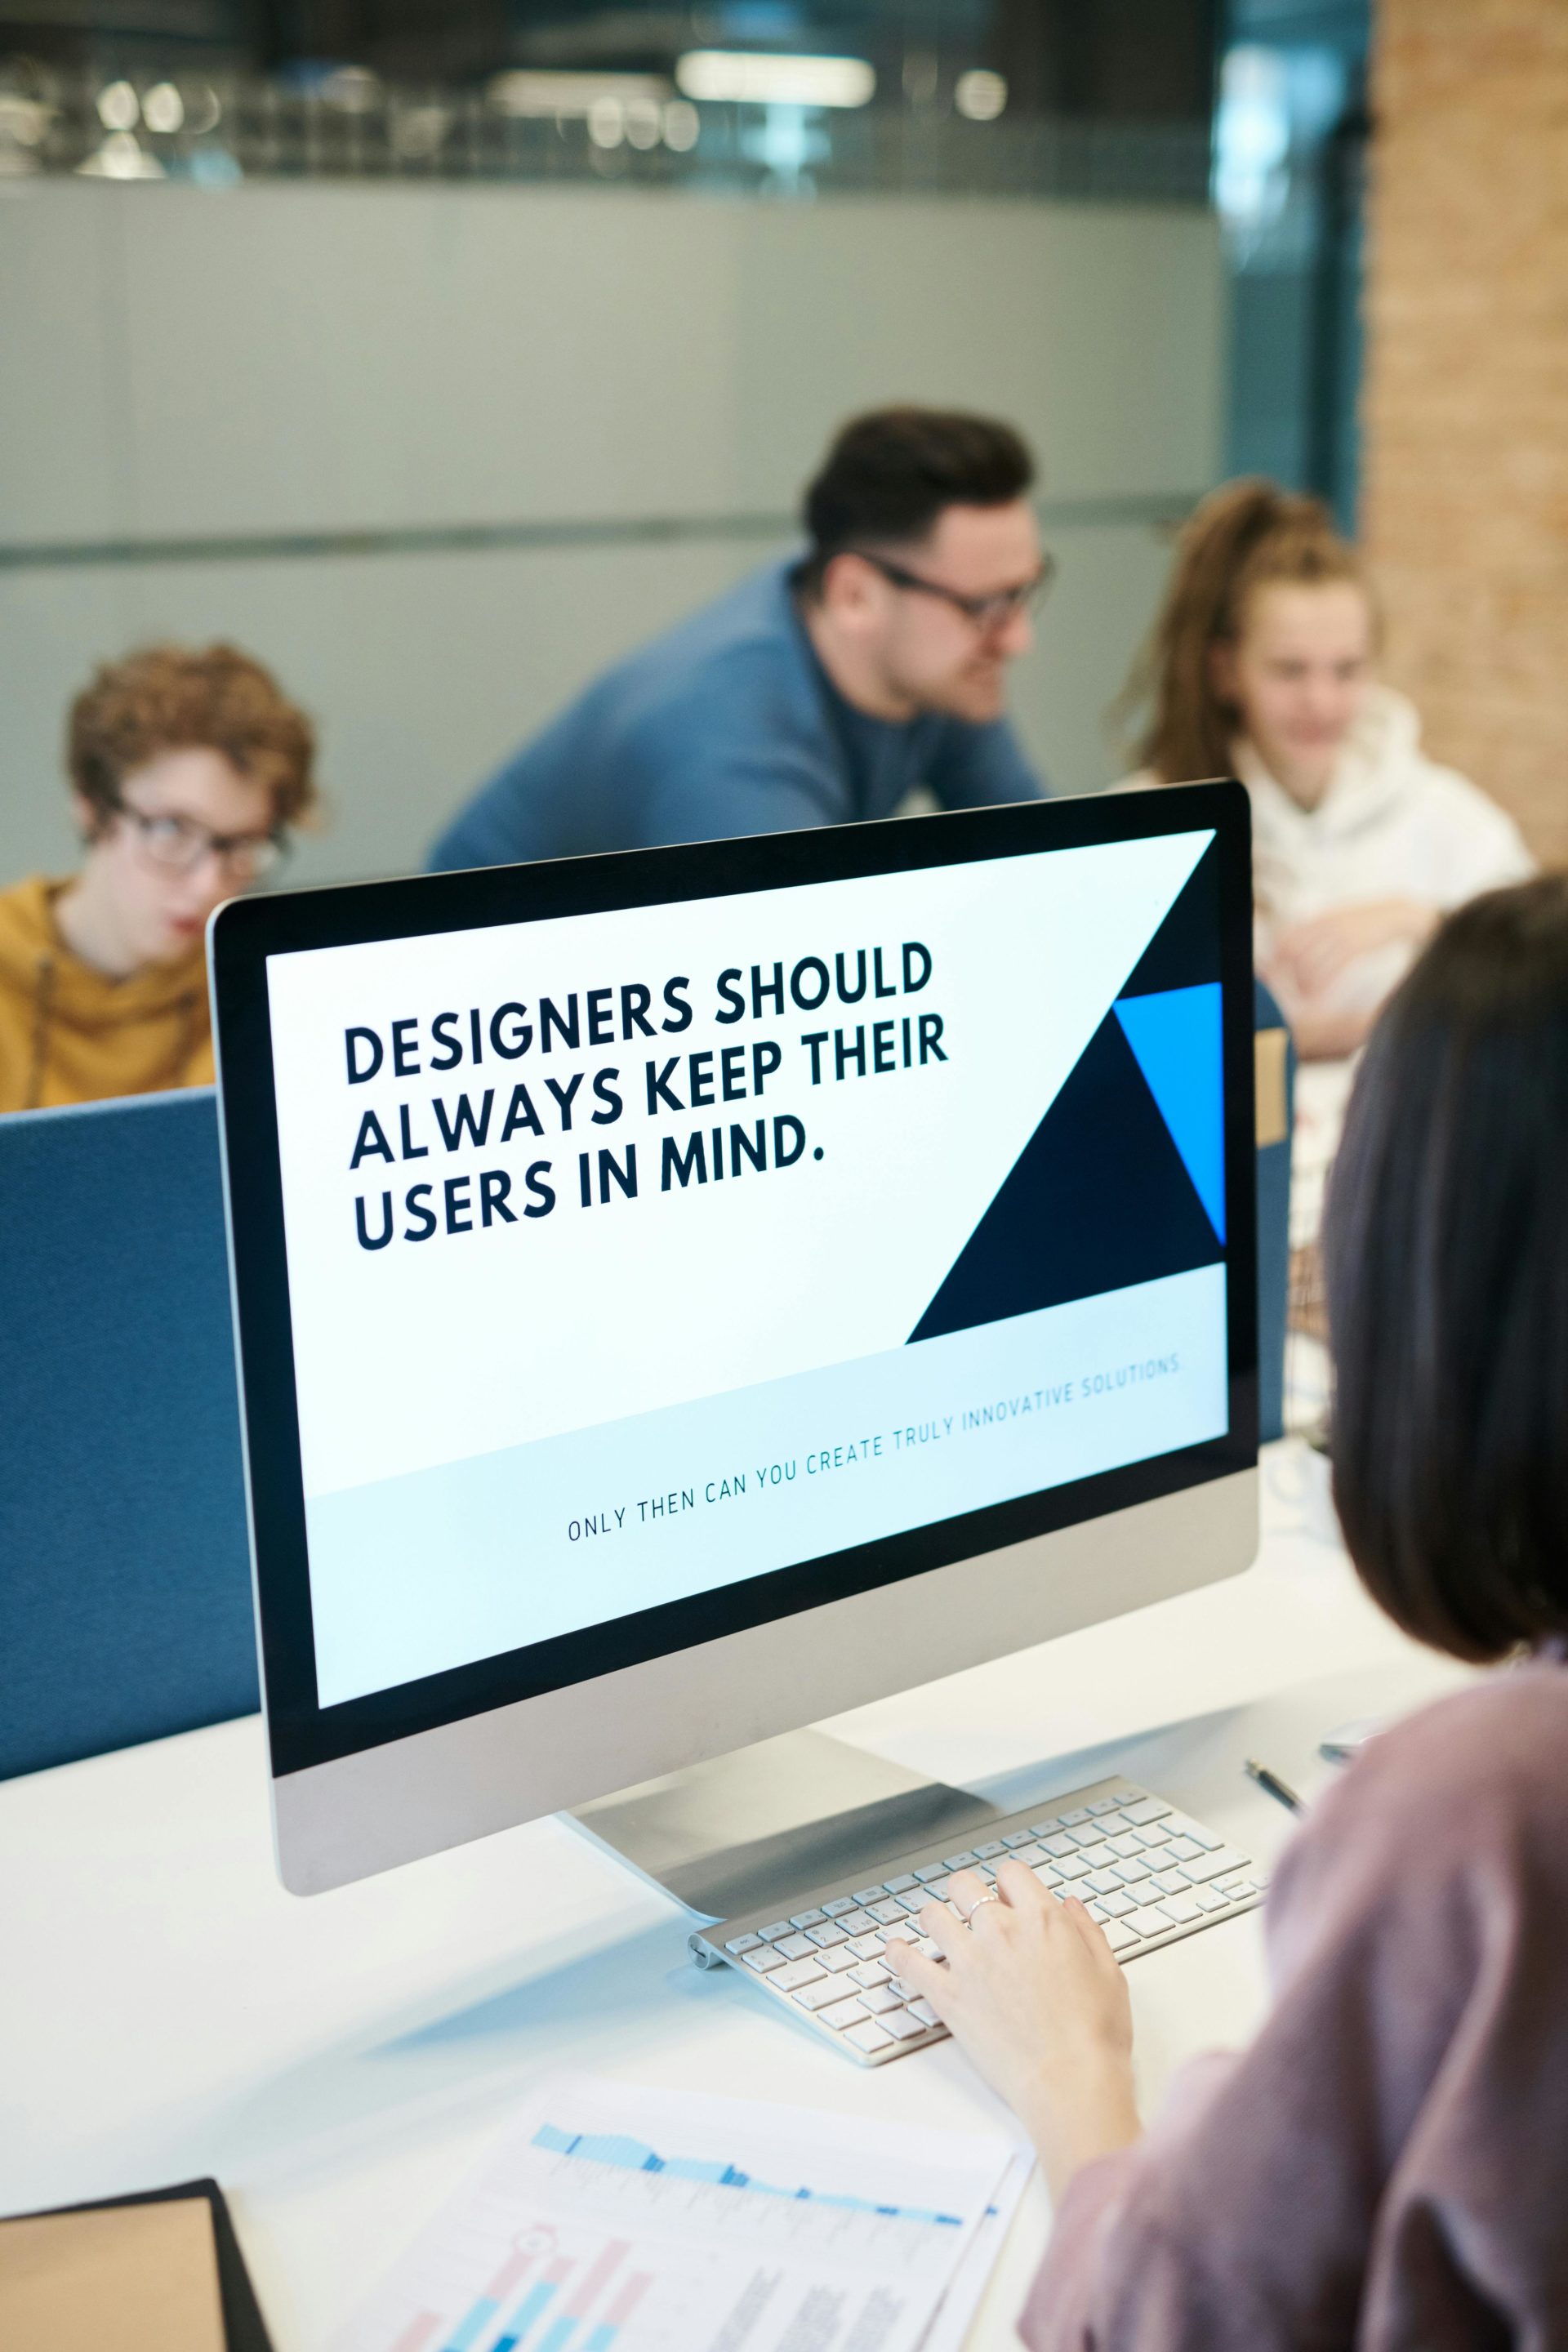 A group of designers attentively discusses around a computer screen displaying a message about user-focused design.